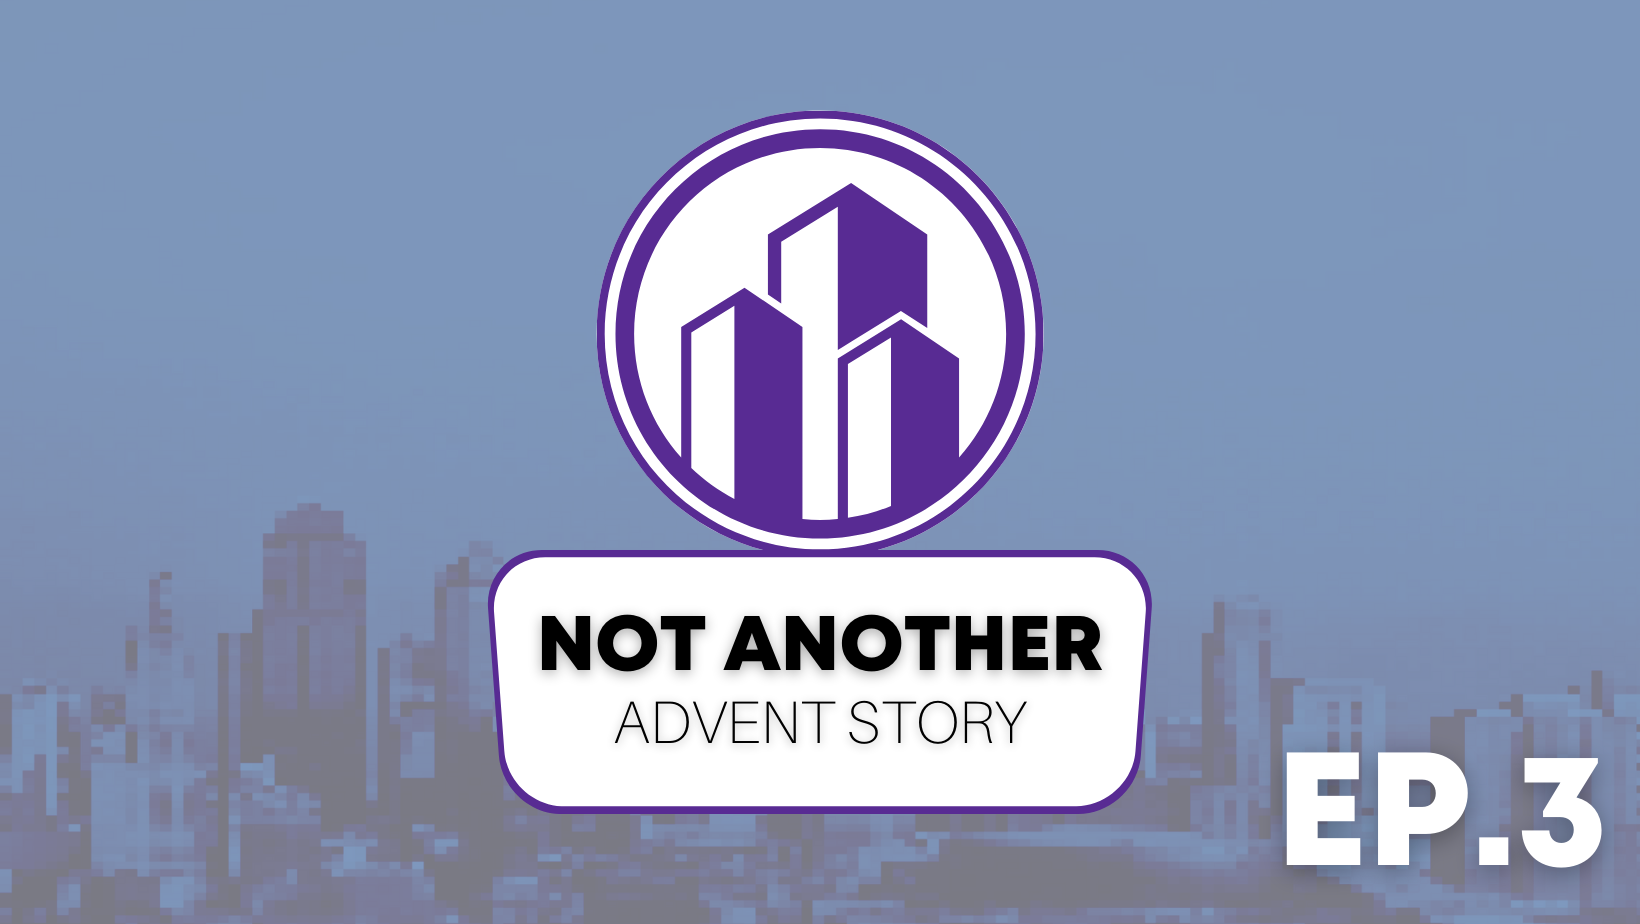 Not Another Advent Story, Episode 3